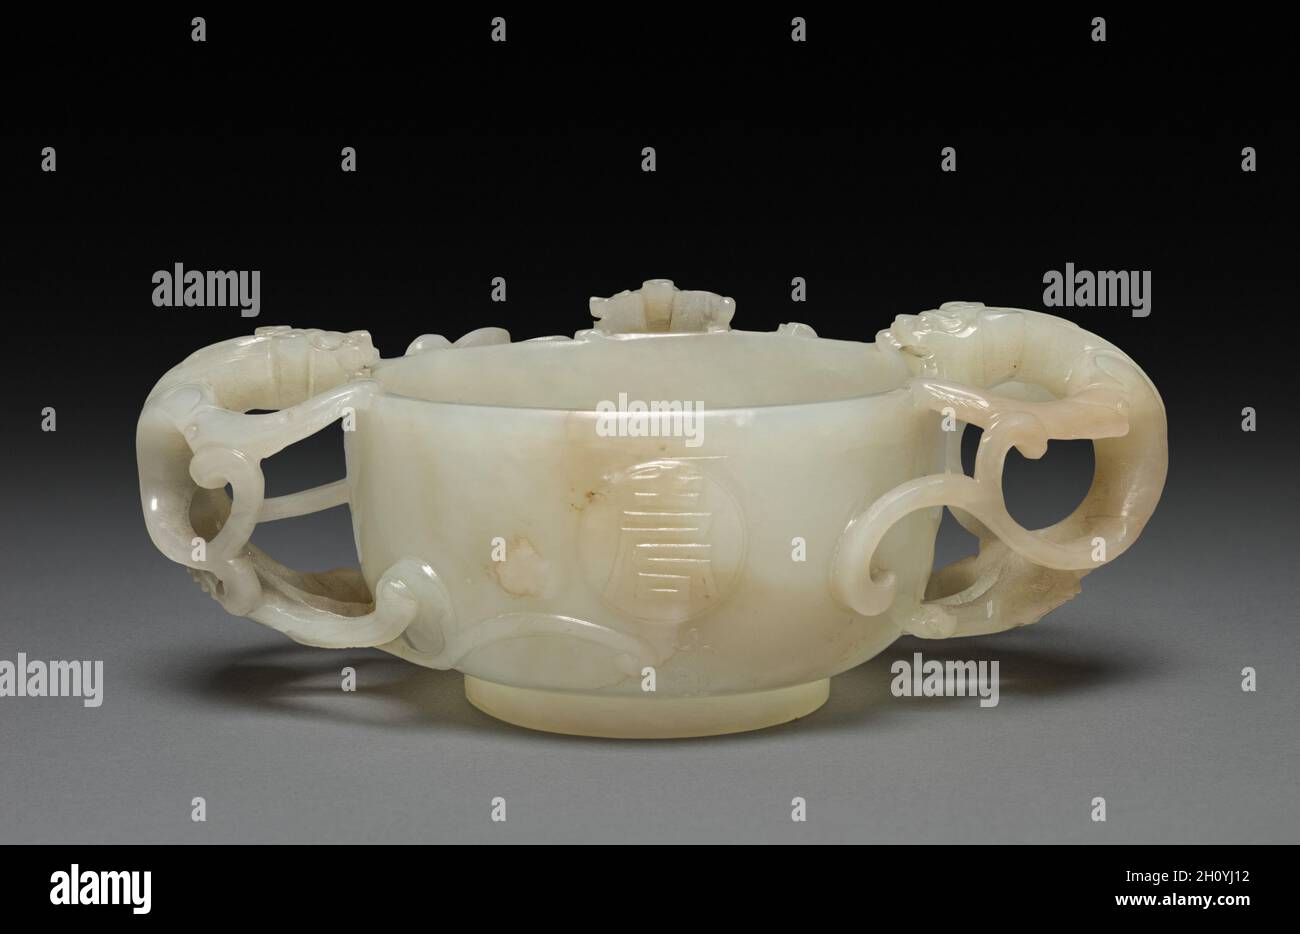 https://c8.alamy.com/comp/2H0YJ12/libation-cup-1662-1722-china-qing-dynasty-1644-1911-kangxi-reign-1662-1722-jade-diameter-146-cm-5-34-in-overall-46-cm-1-1316-in-2H0YJ12.jpg